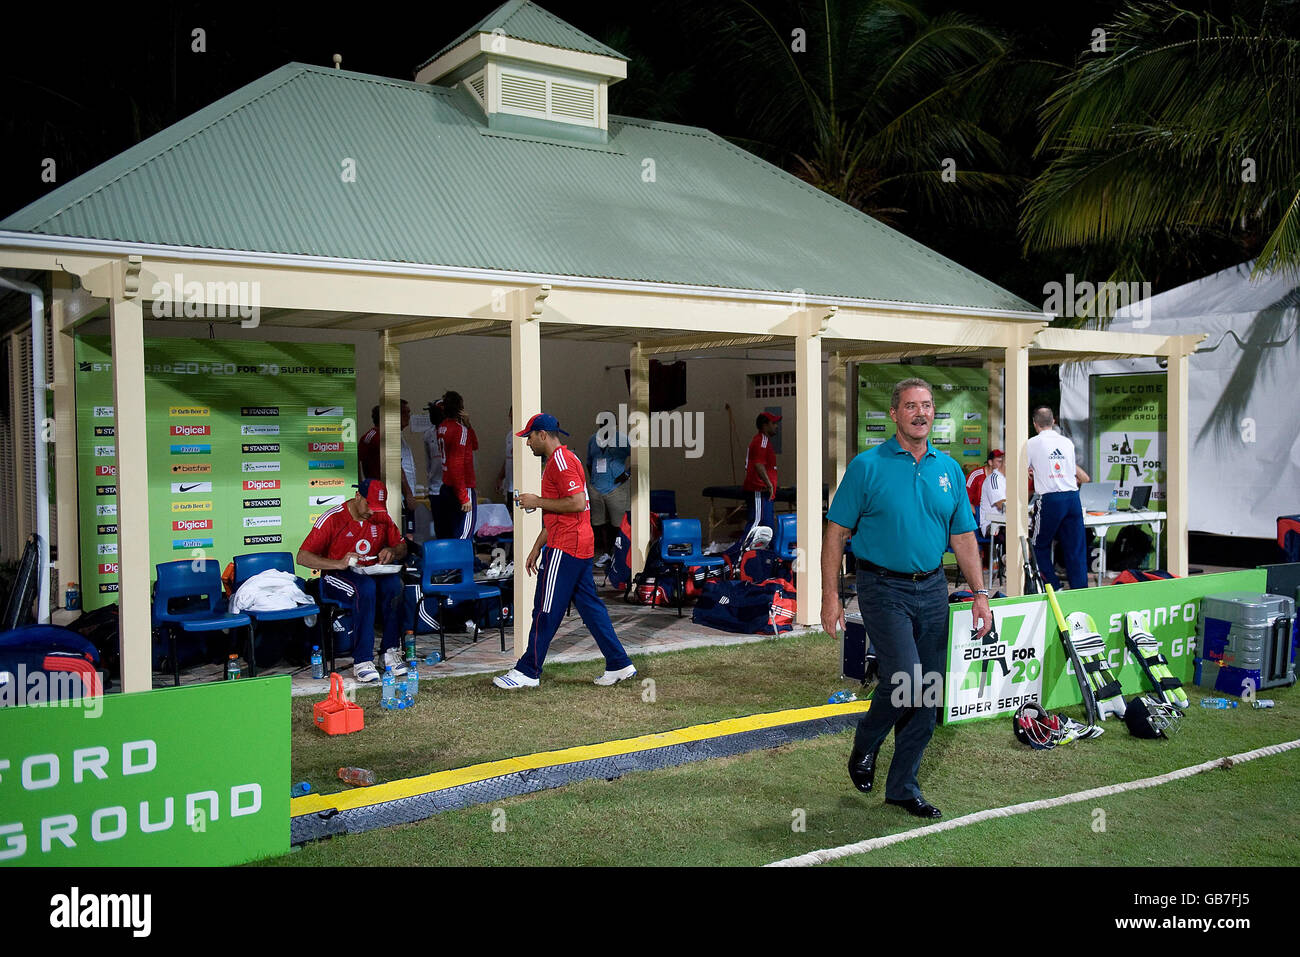 Sir Allen Stanford leaves the England dressing room after there victory against Trinida & Tobago during the Stanford Super Series match at the Stanford Cricket Ground, Coolidge, Antigua. Stock Photo